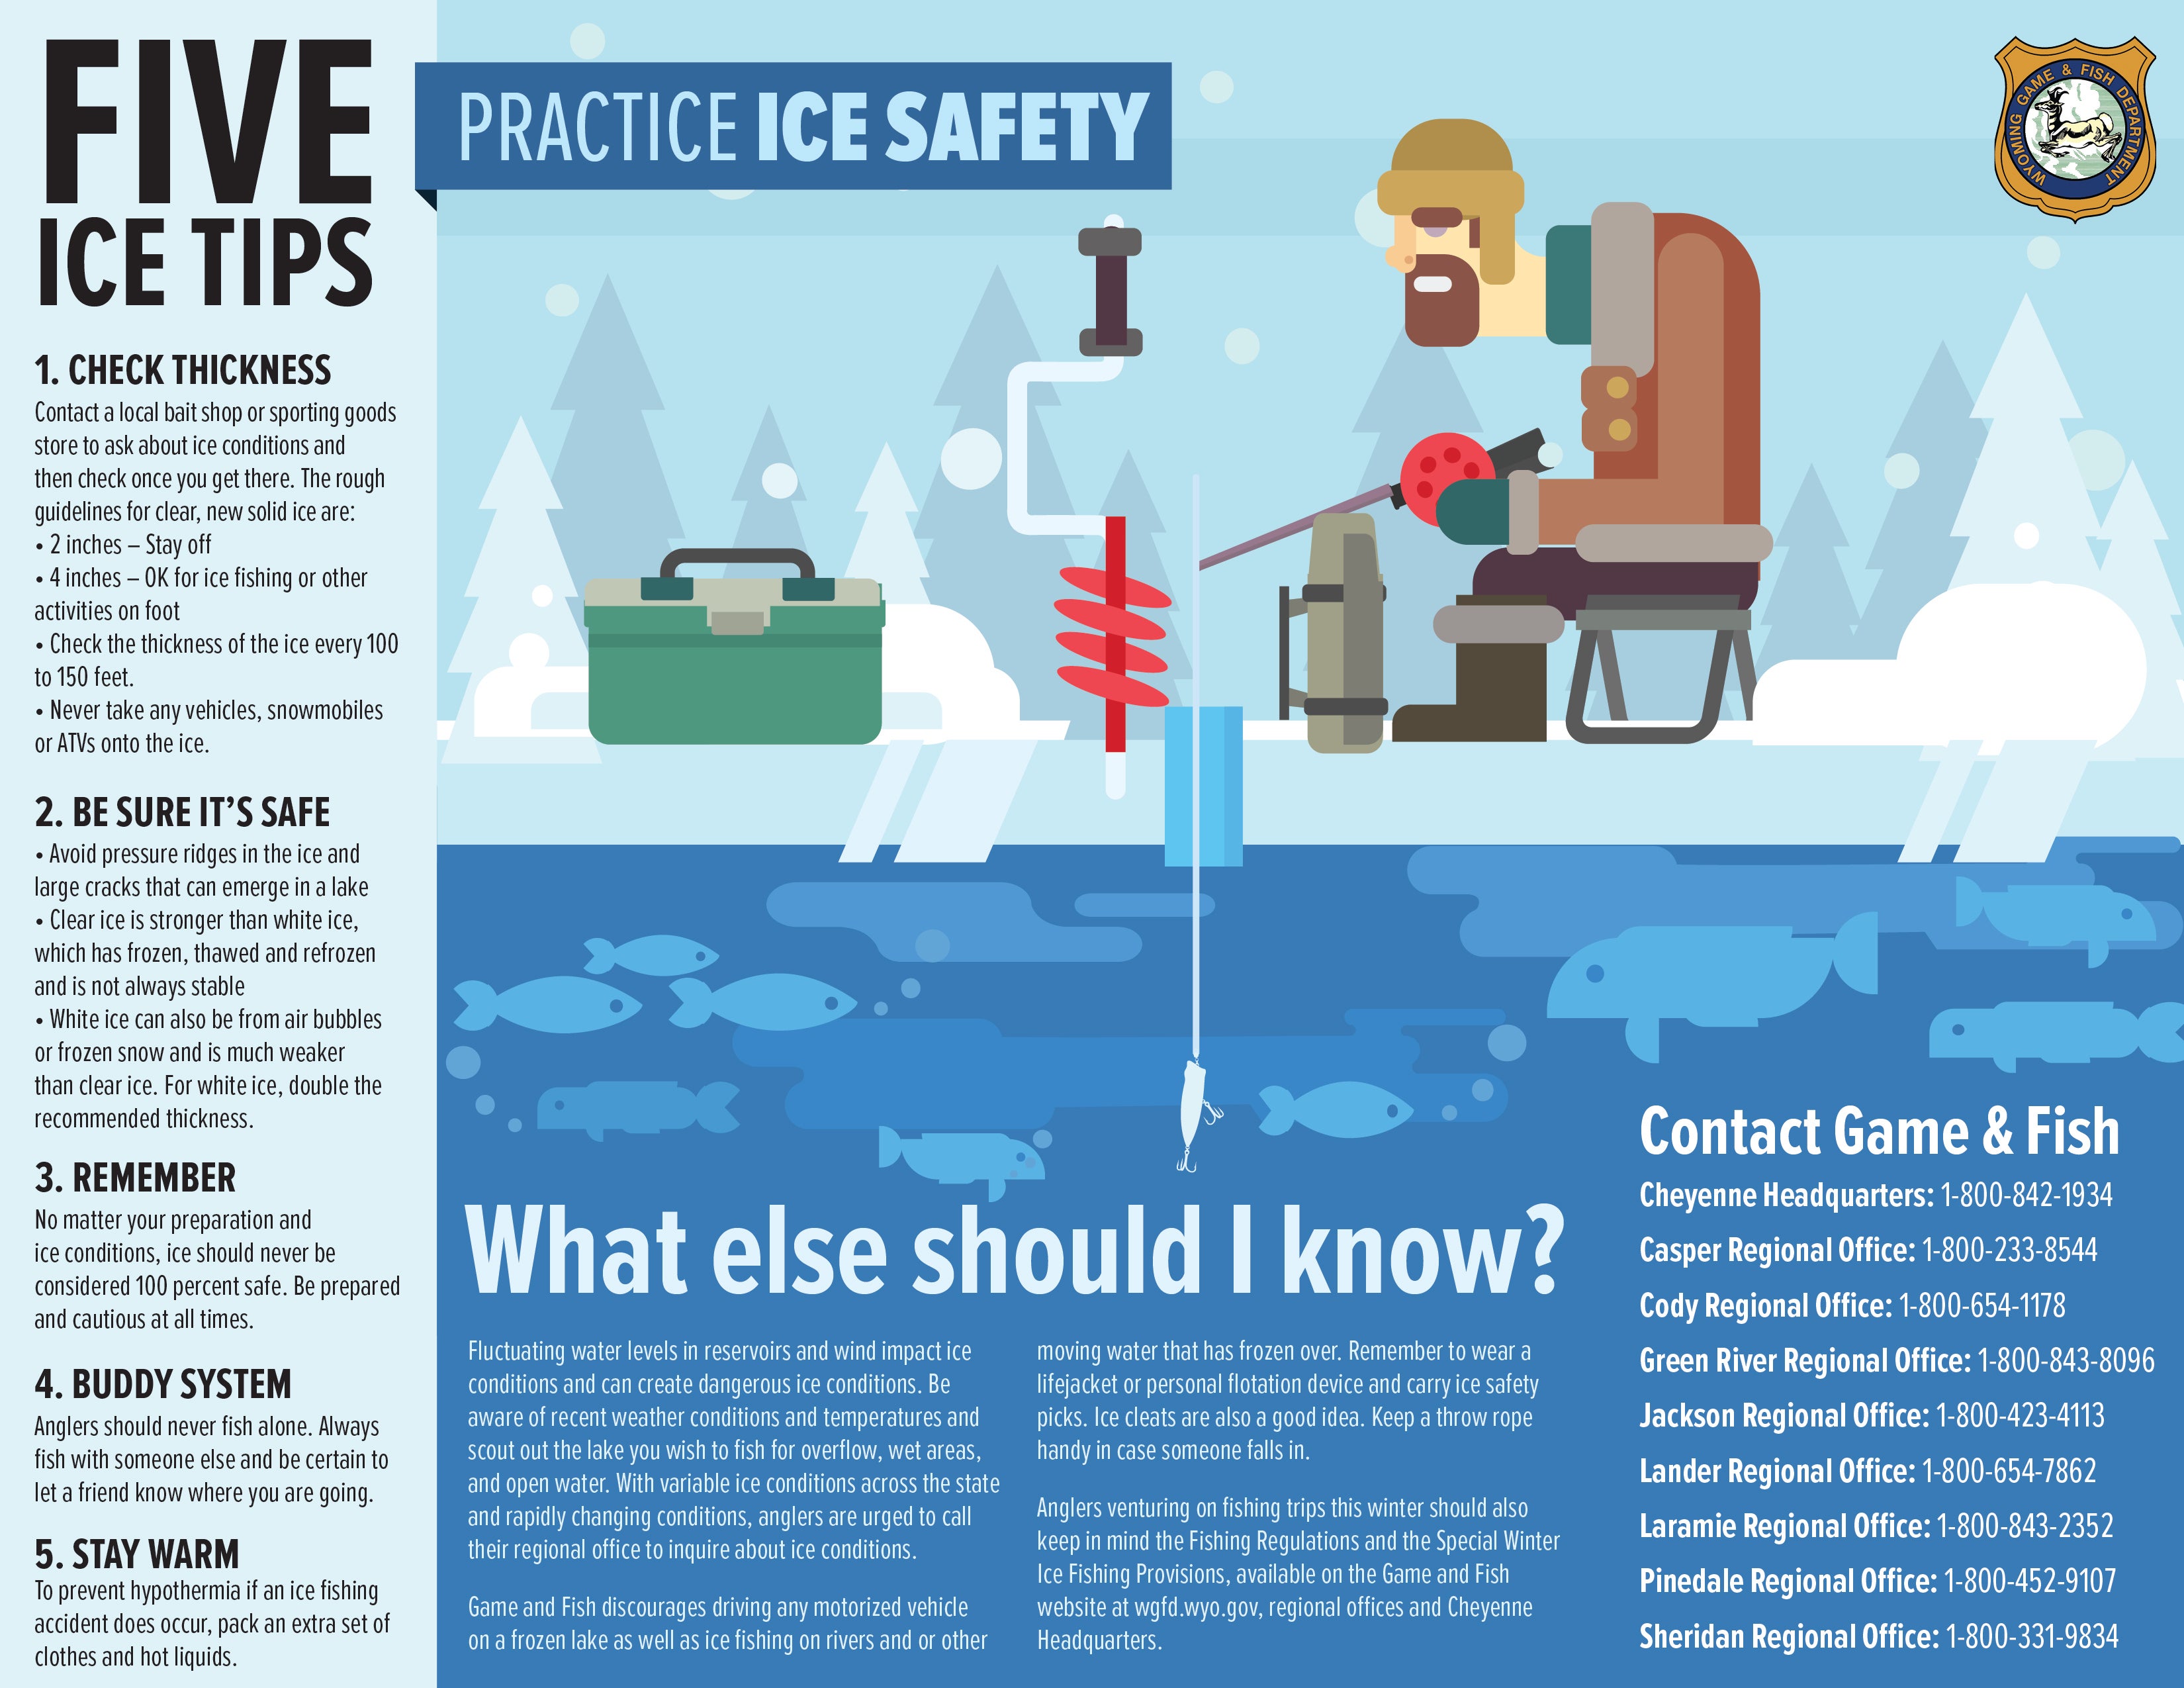 https://wgfd.wyo.gov/sites/default/files/content/News/ice-safety-infographic-(1)_1.jpg